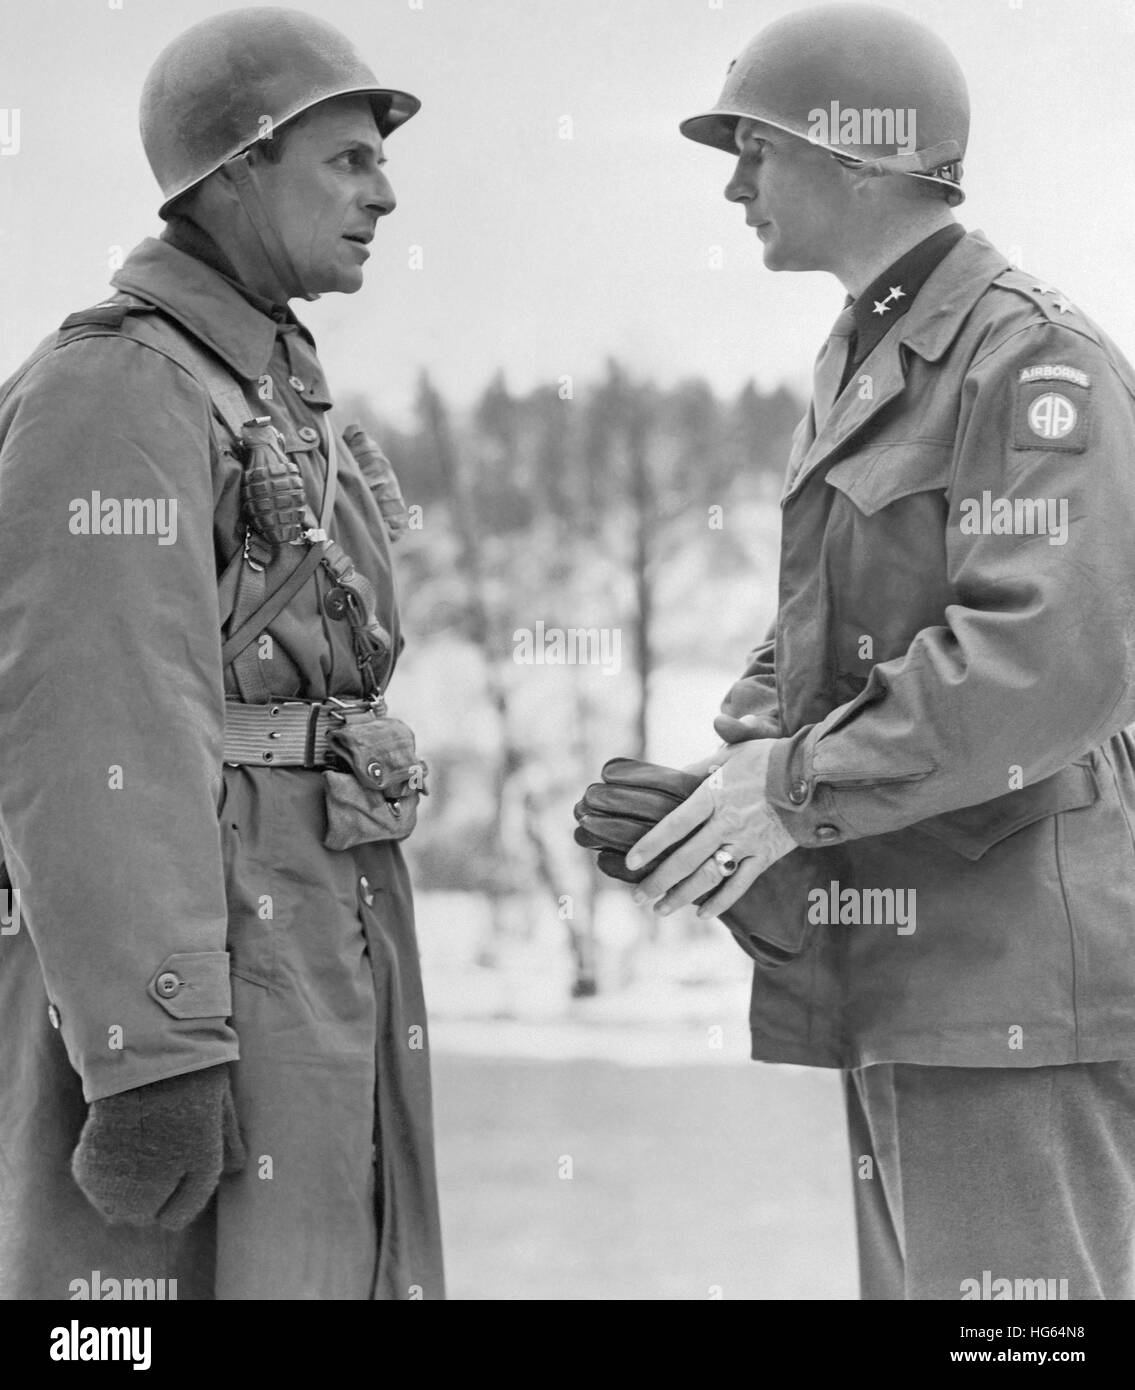 Major General Matthew Ridgway and James Gavin during the Battle of the Bulge. Stock Photo